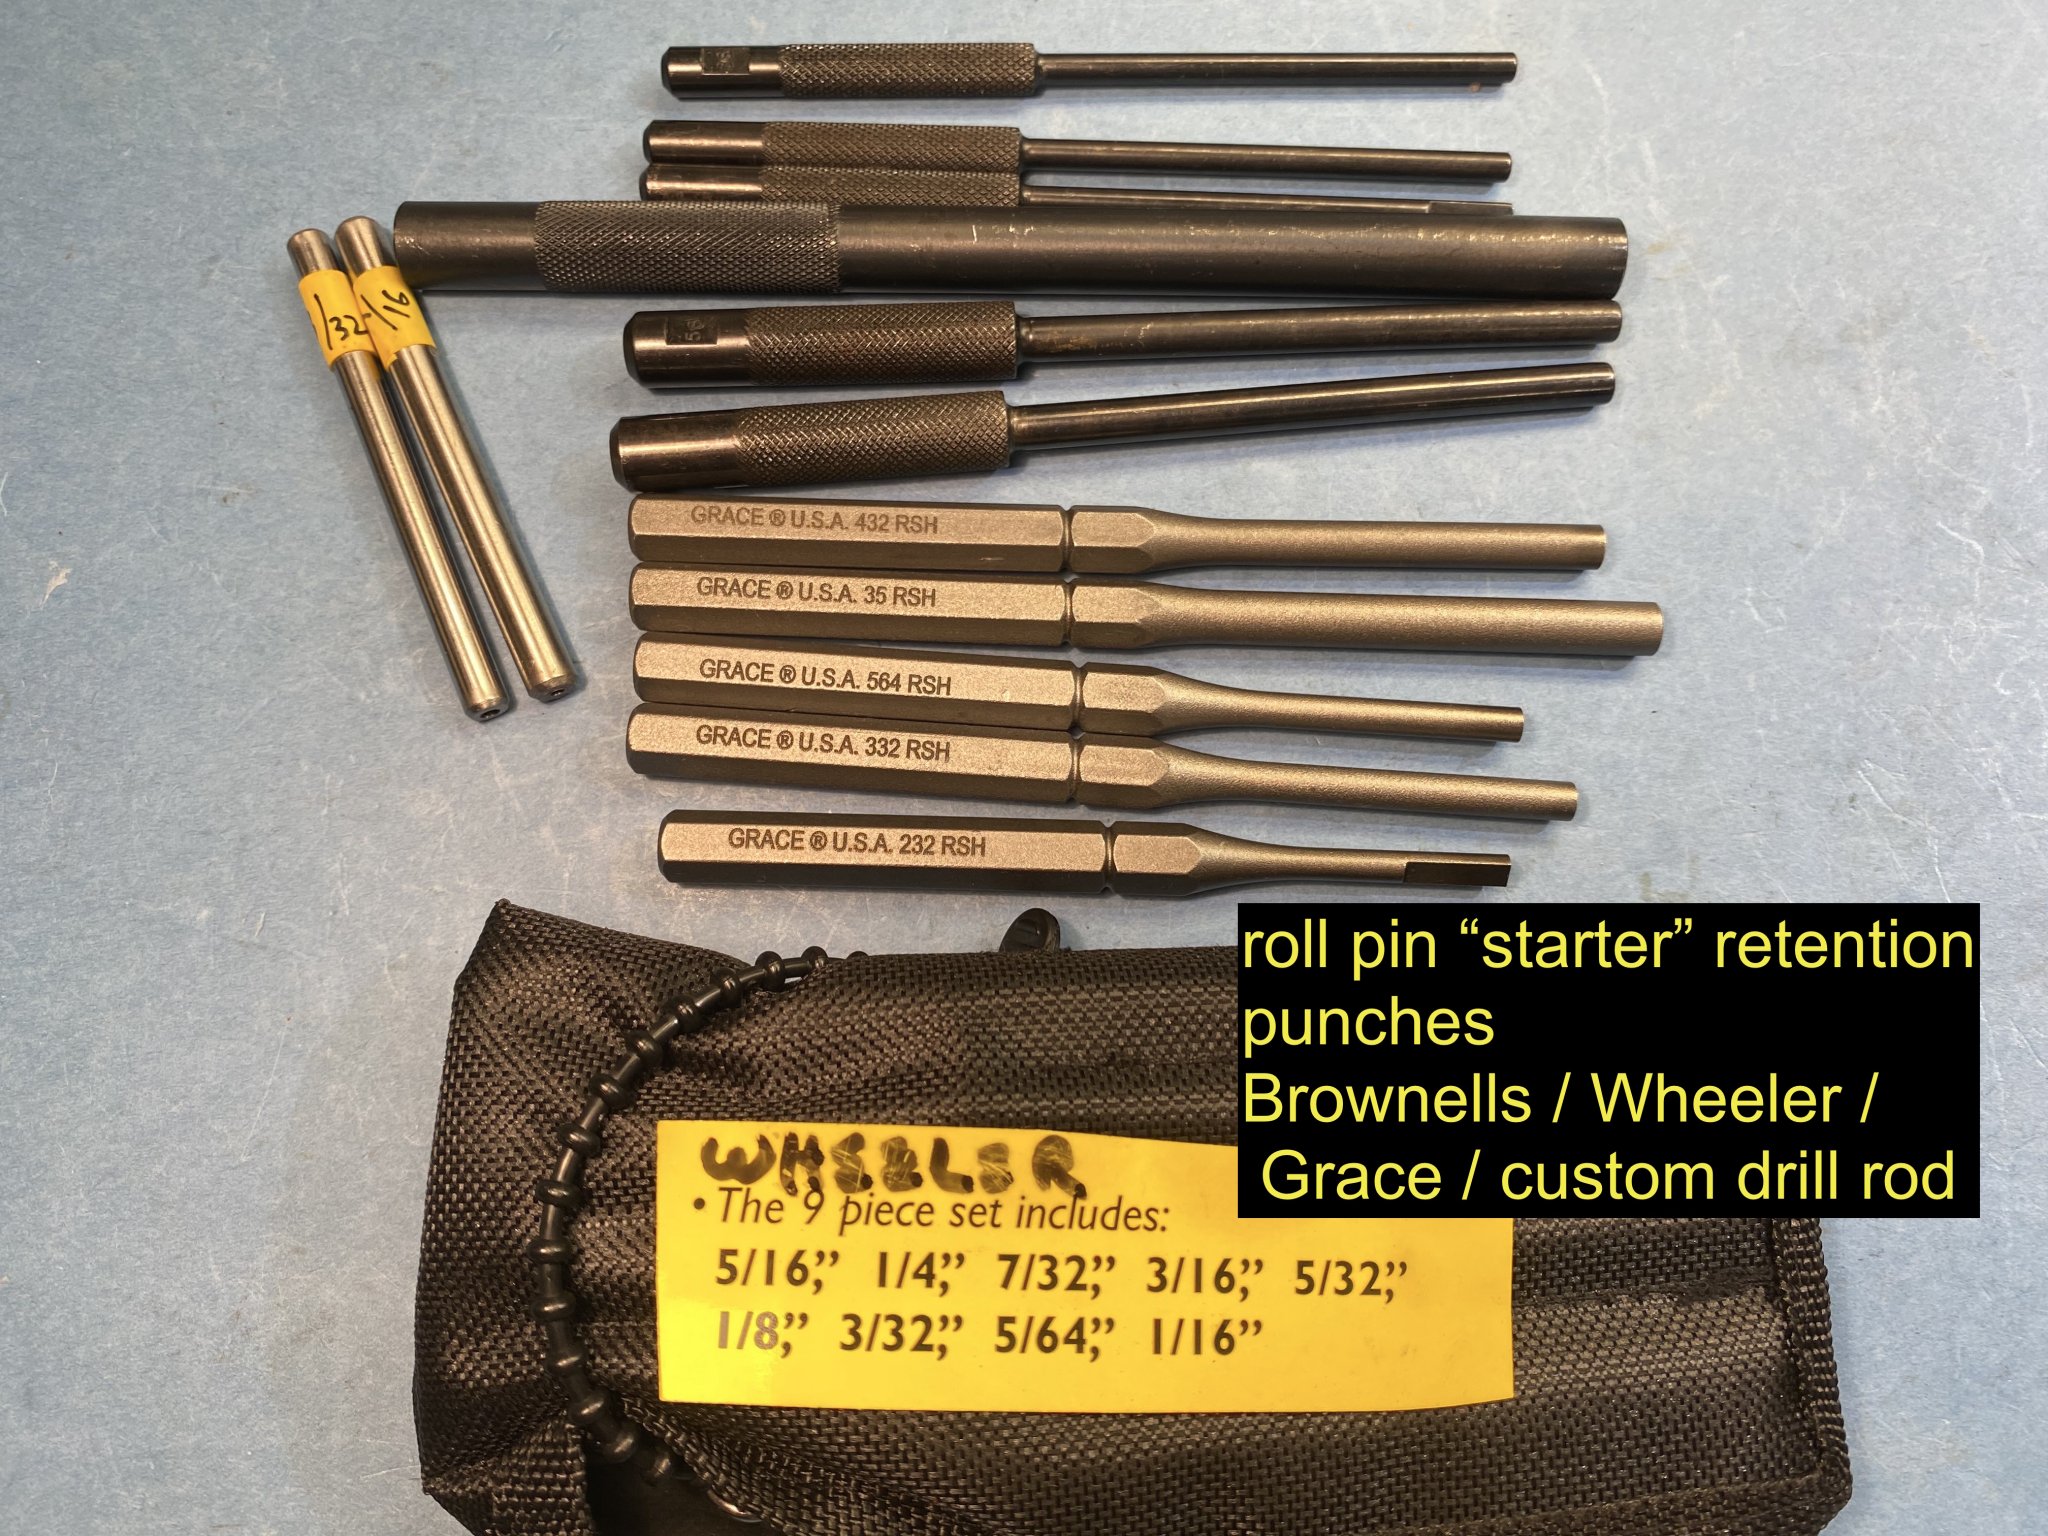 GearWrench 70-546G 3 Pc. Brass Pin Punch Set